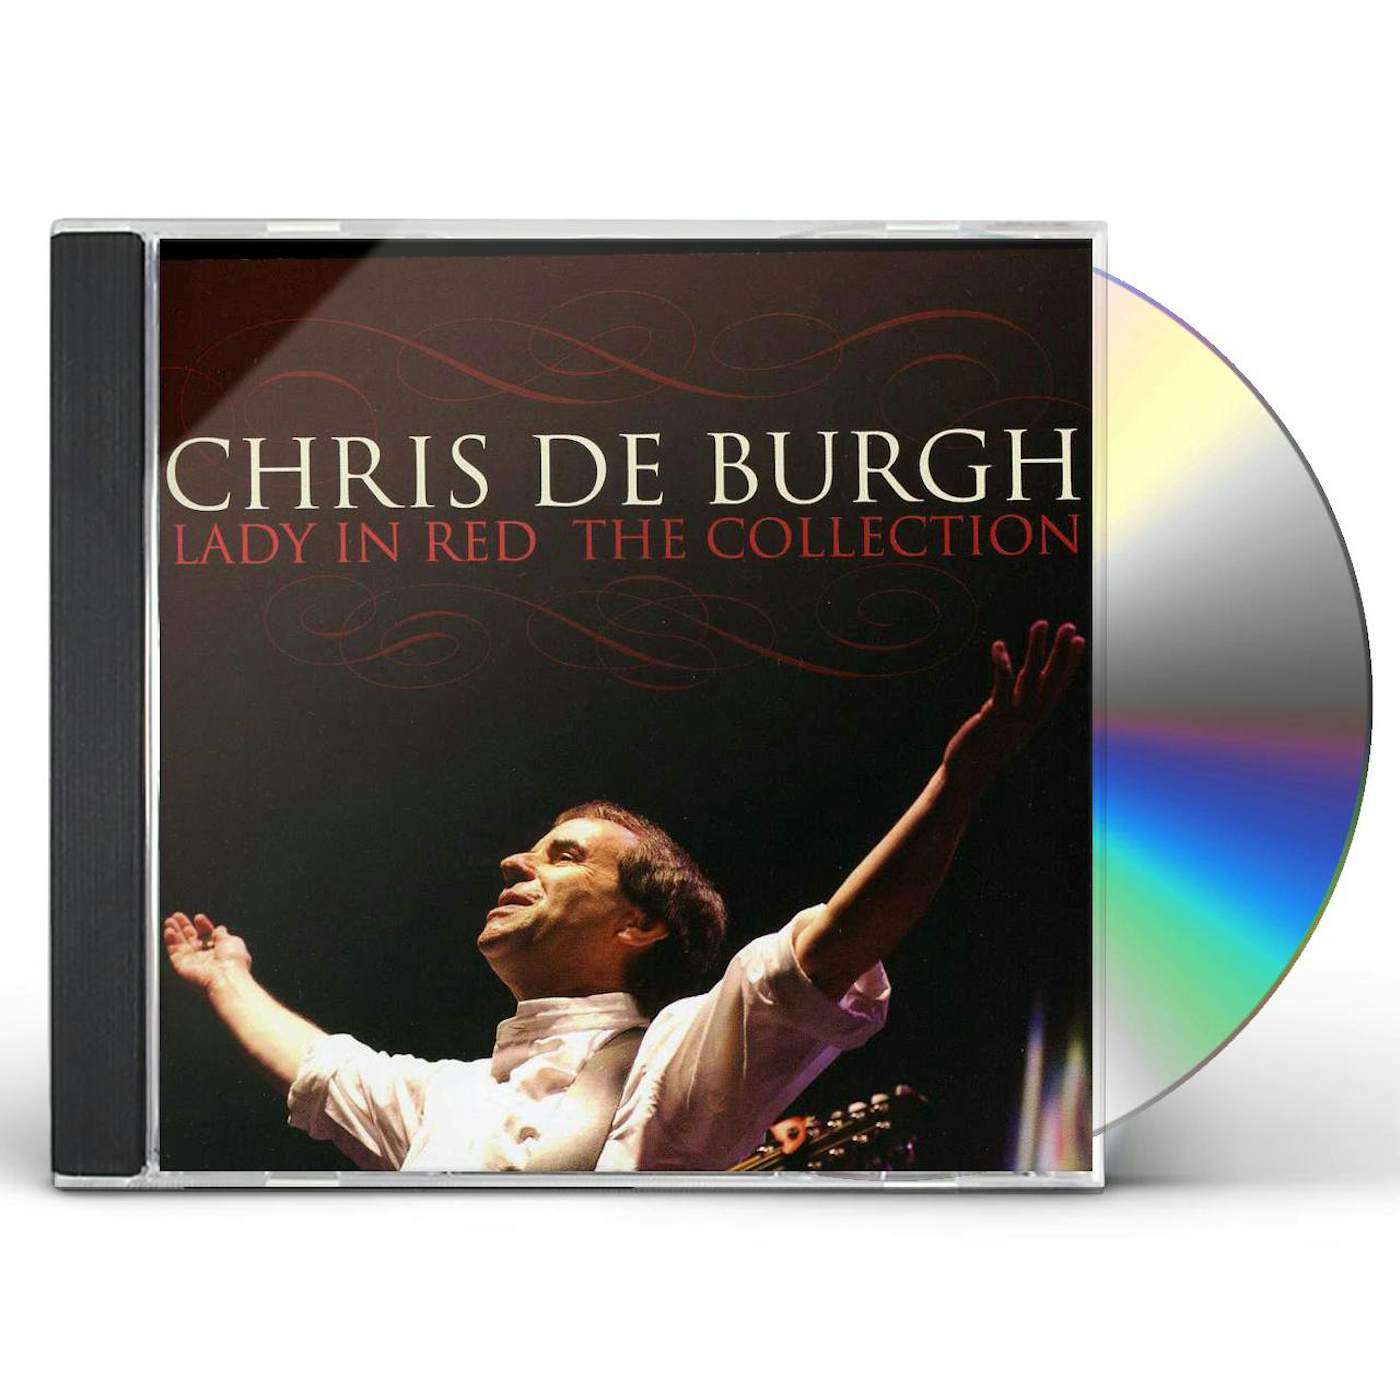 Chris de Burgh LADY IN RED: COLLECTION CD